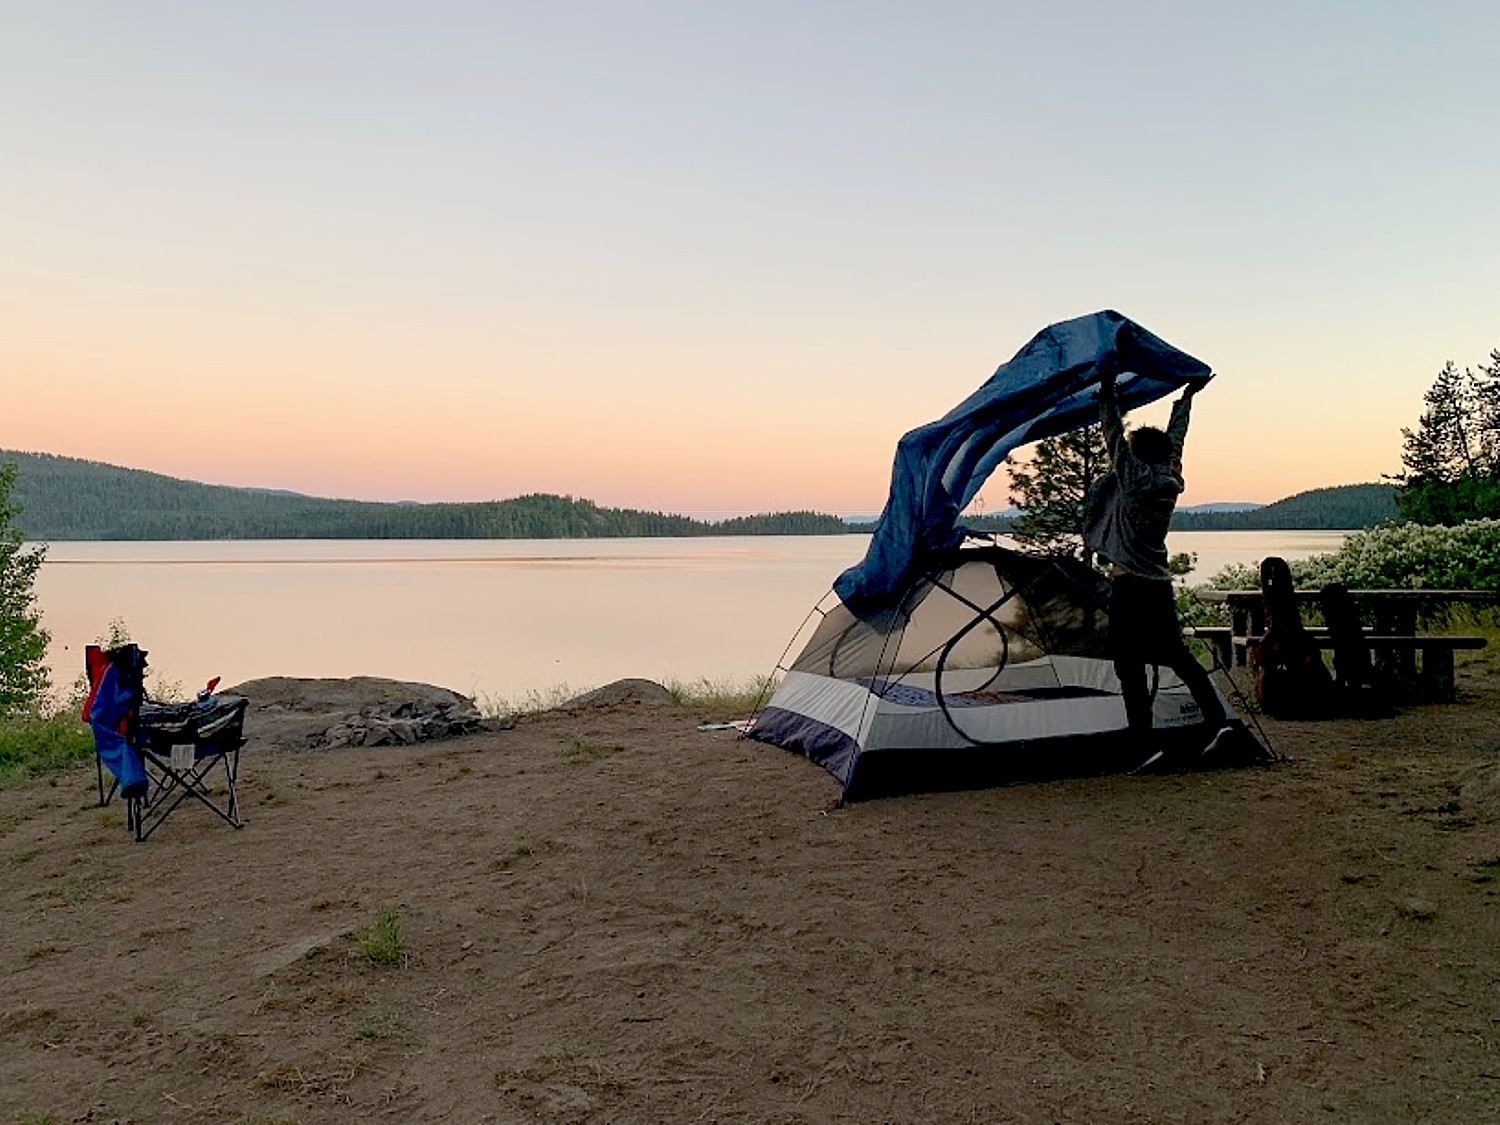 Car Camping in Comfort: How We Turned our Subaru into Our Home On the Road